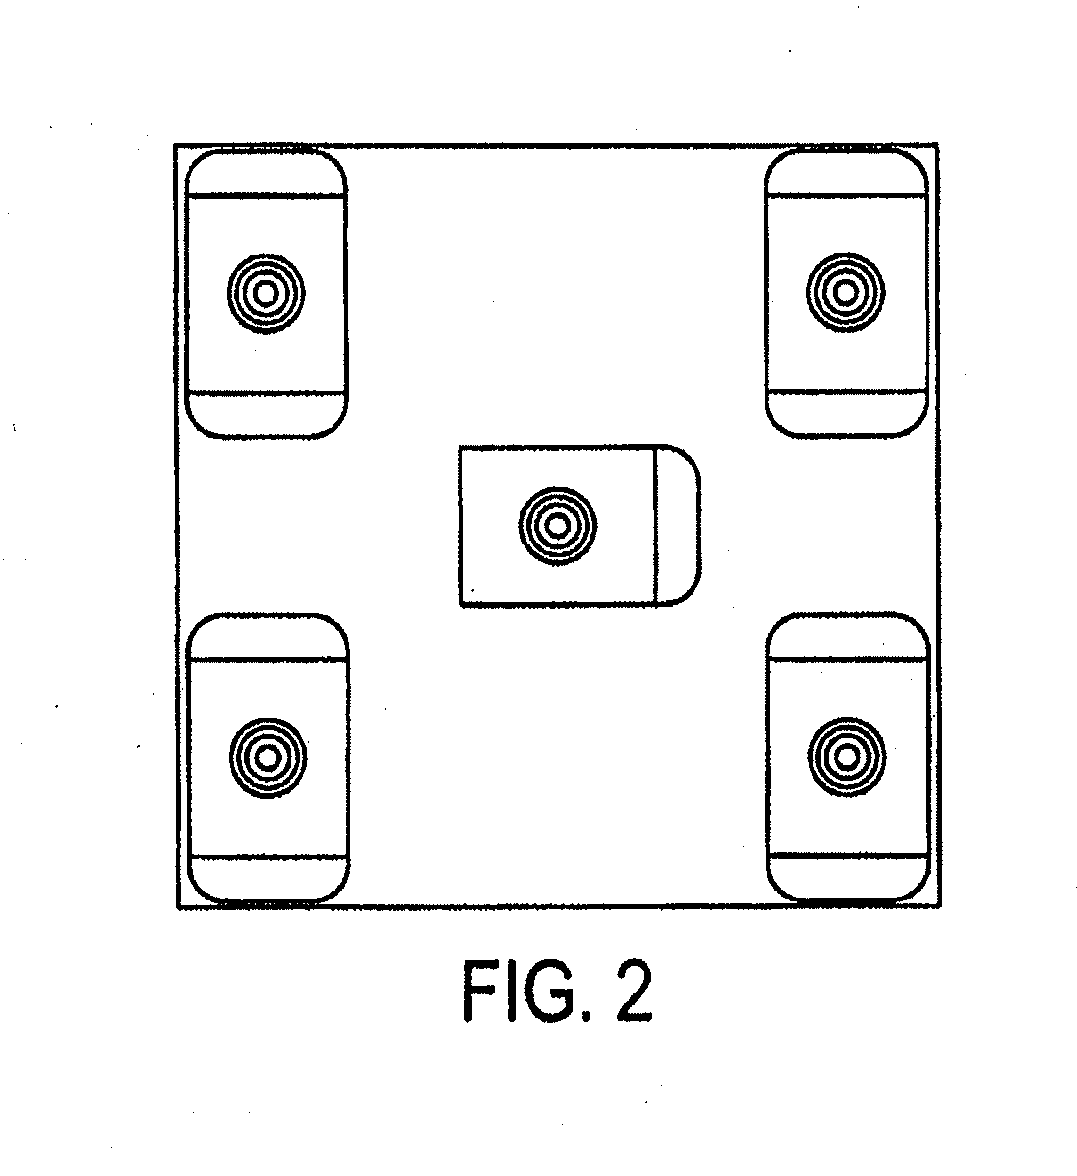 Electrocardiograph monitoring device and connector